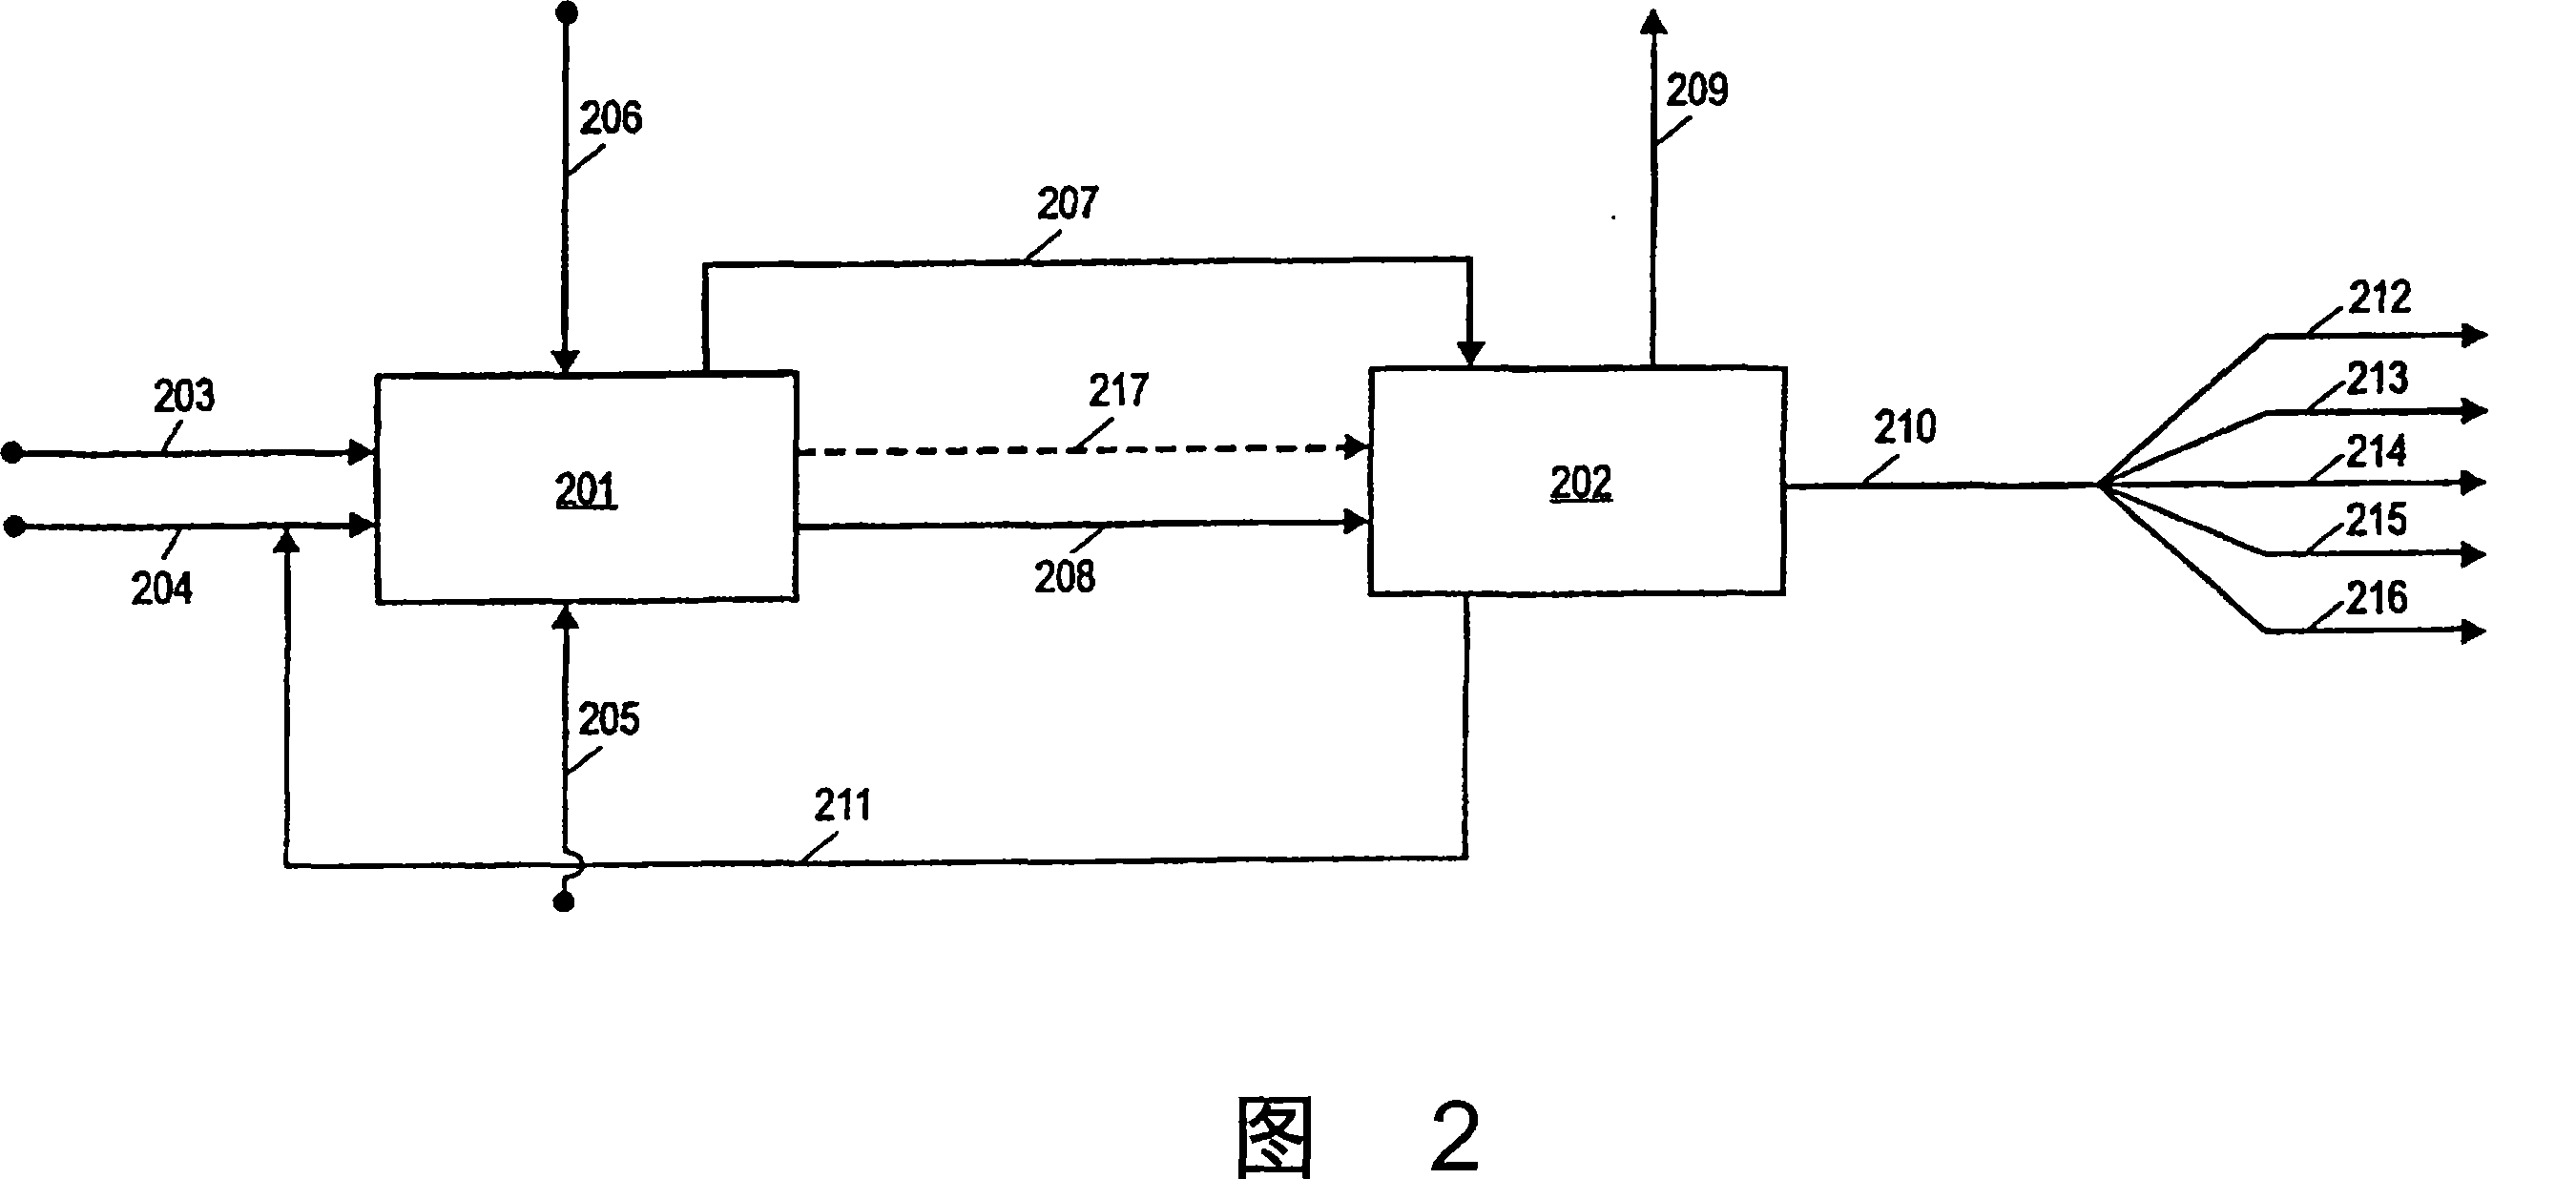 Method of slurry dewatering and conversion of biosolids to a renewable fuel